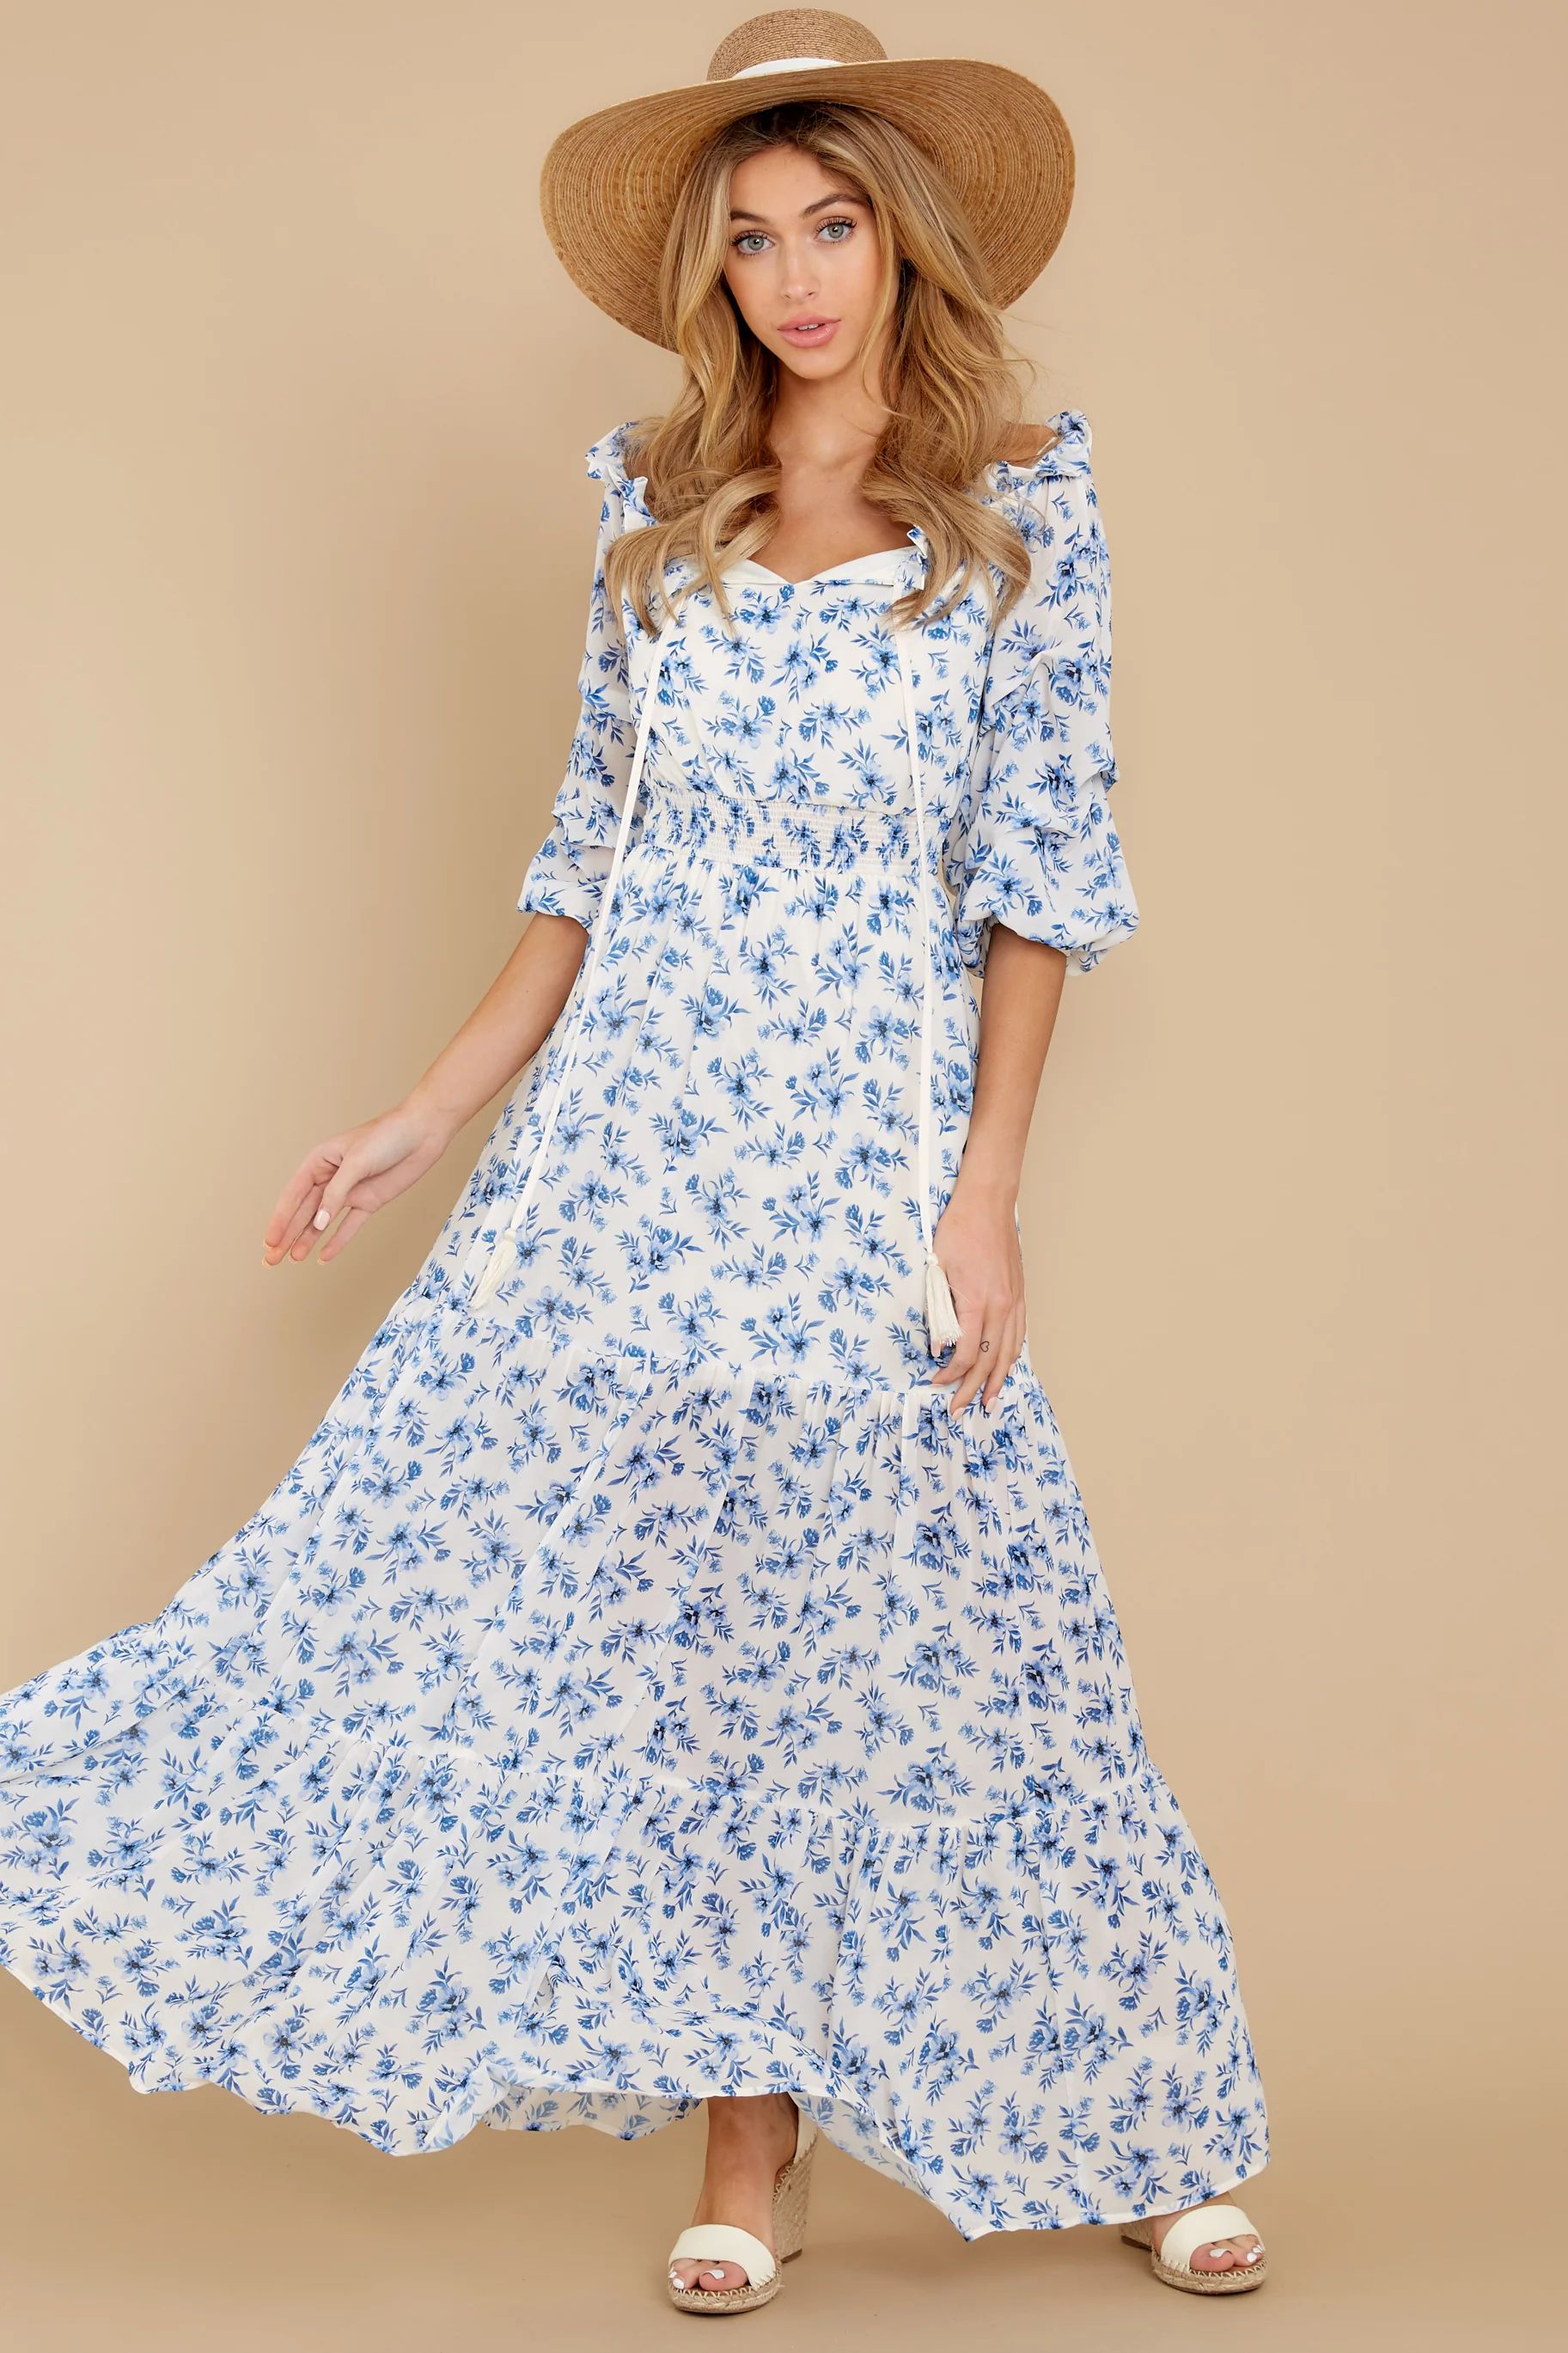 By Morning's Light Blue Floral Print Maxi Dress | Red Dress 